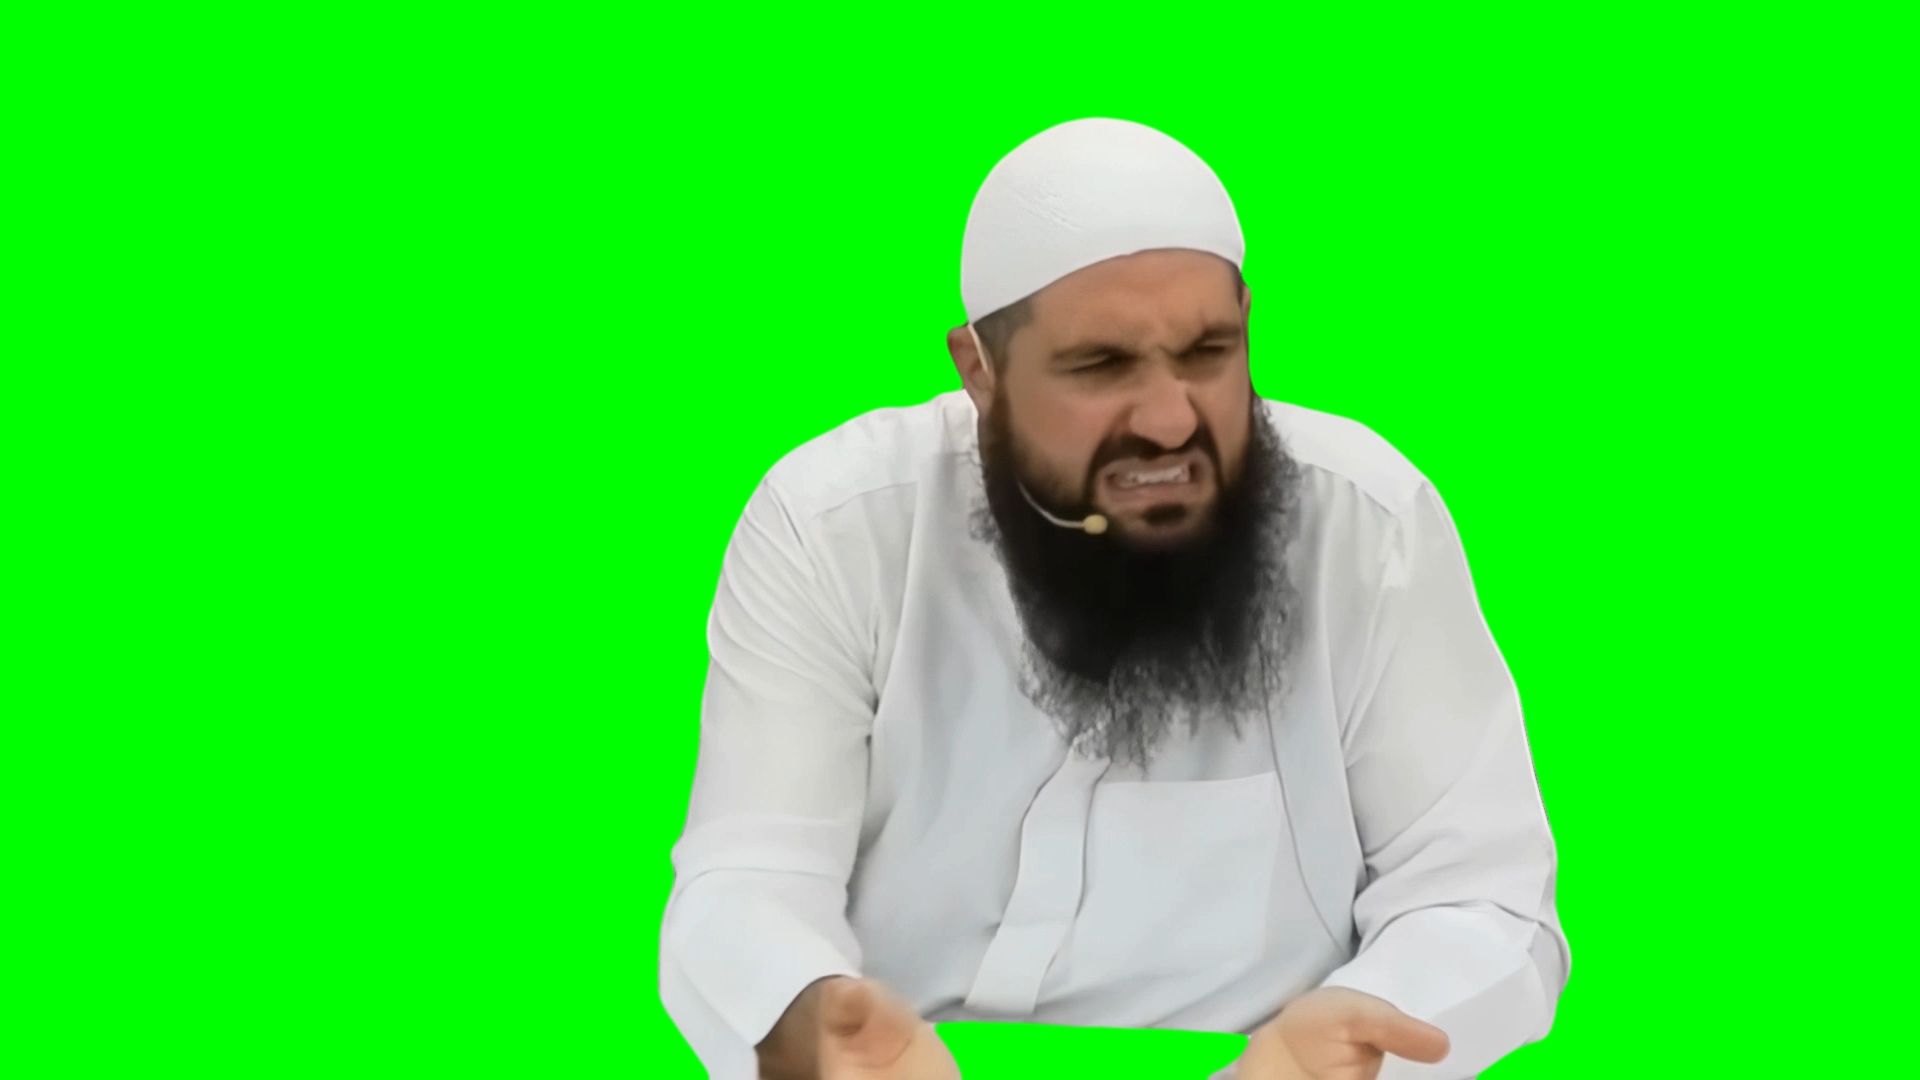 Brother ew! What's that brother?! meme - Mohamed Hoblos (Green Screen)